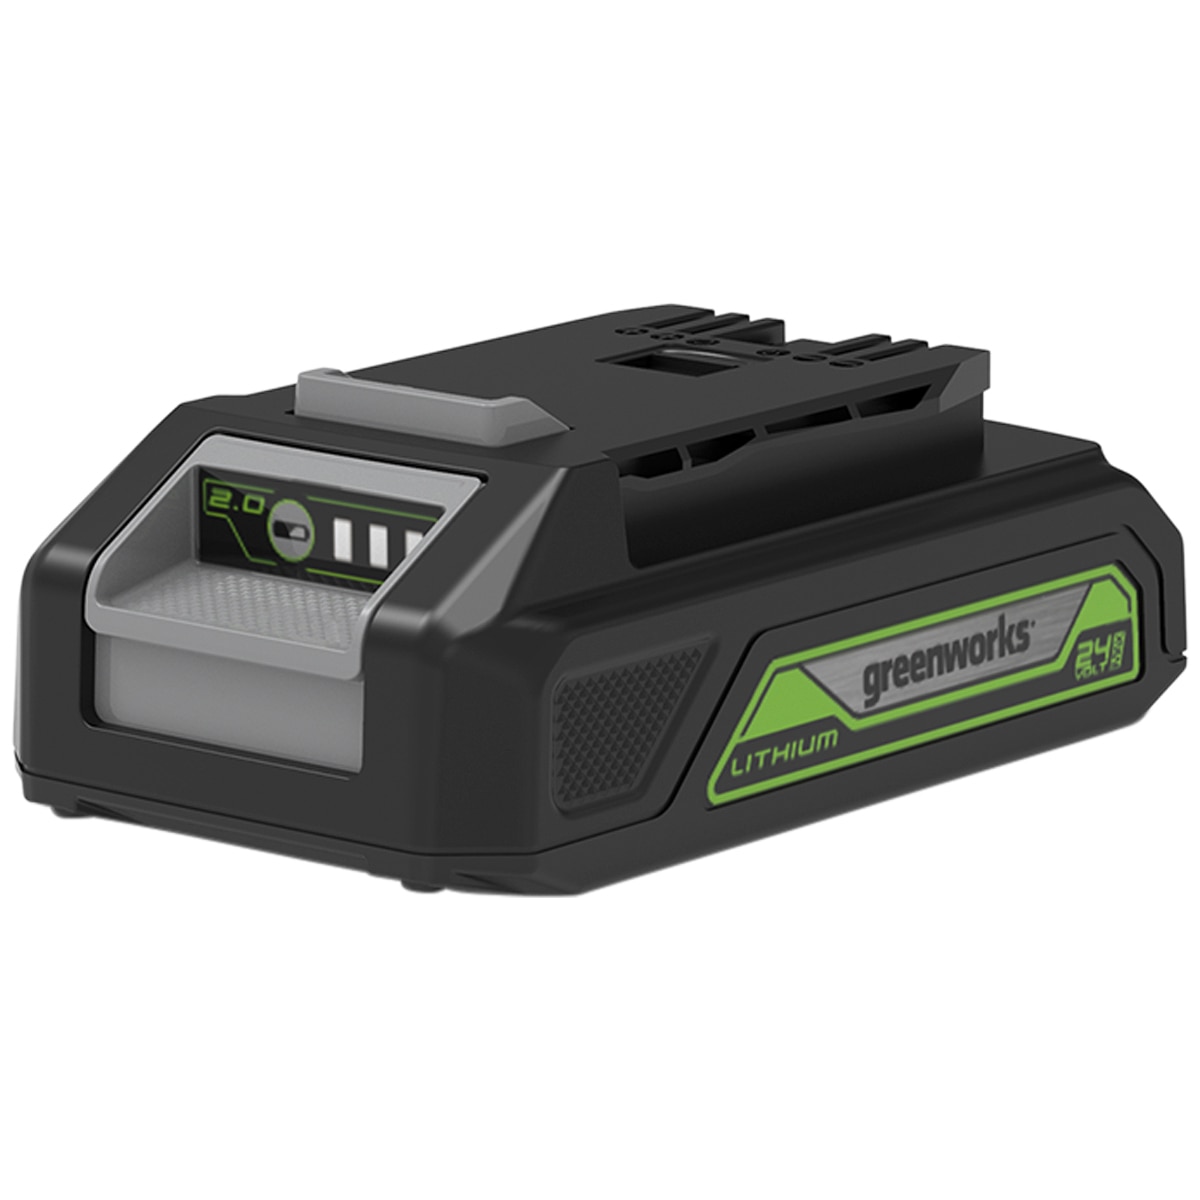 Greenworks Work Light Kit with Battery & Charger